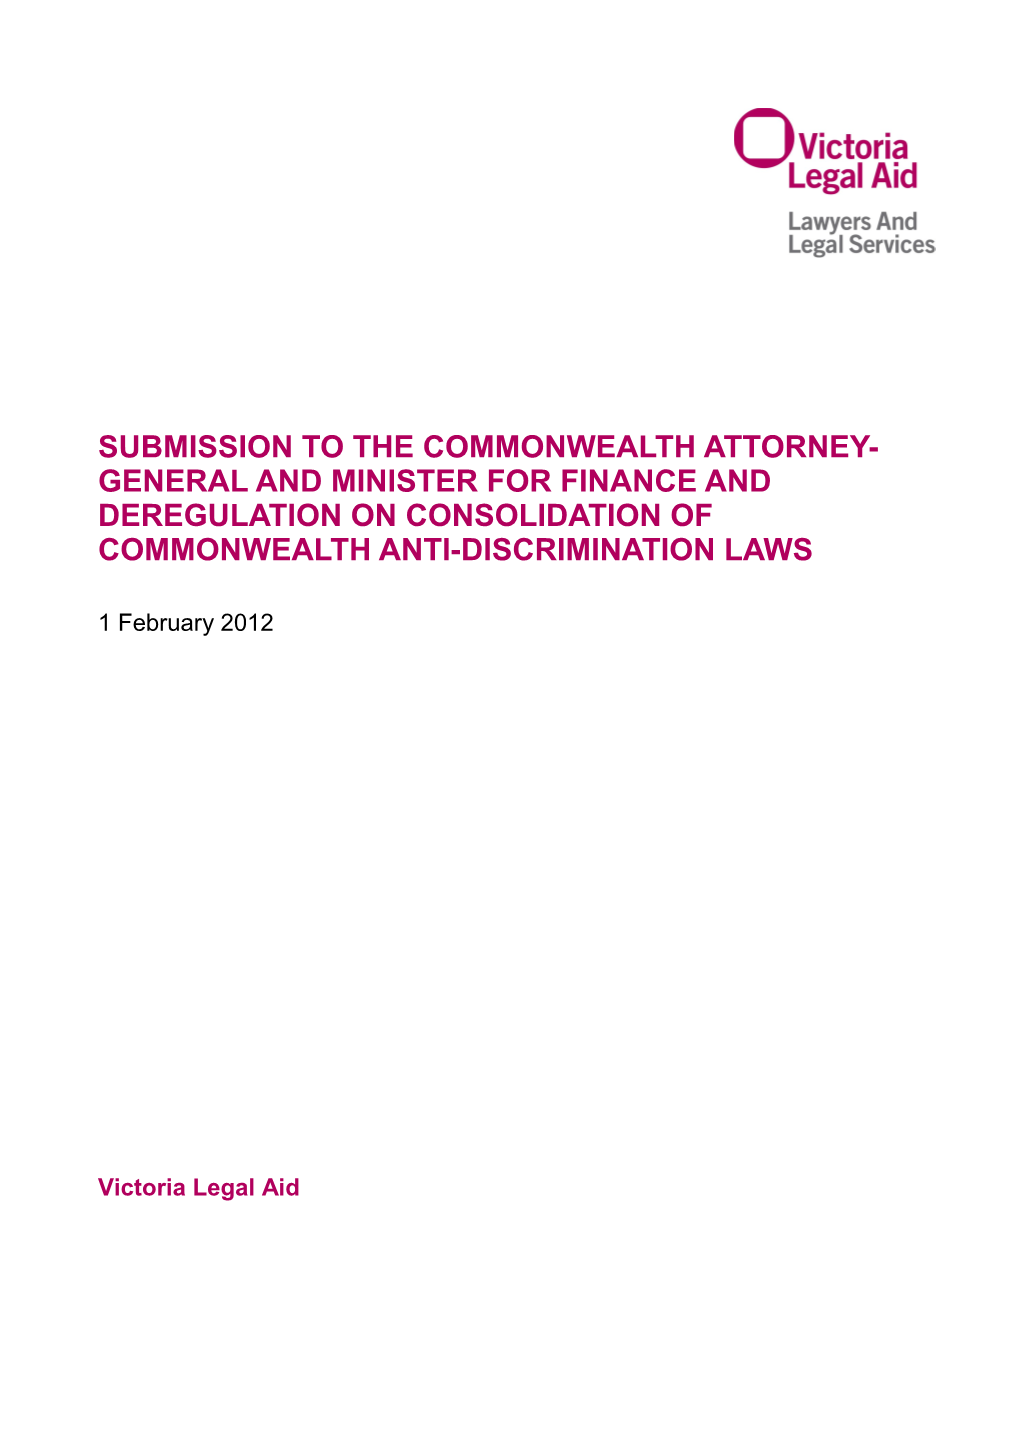 Submission to the Commonwealth Attorney-General and Minister for Finance and Deregulation